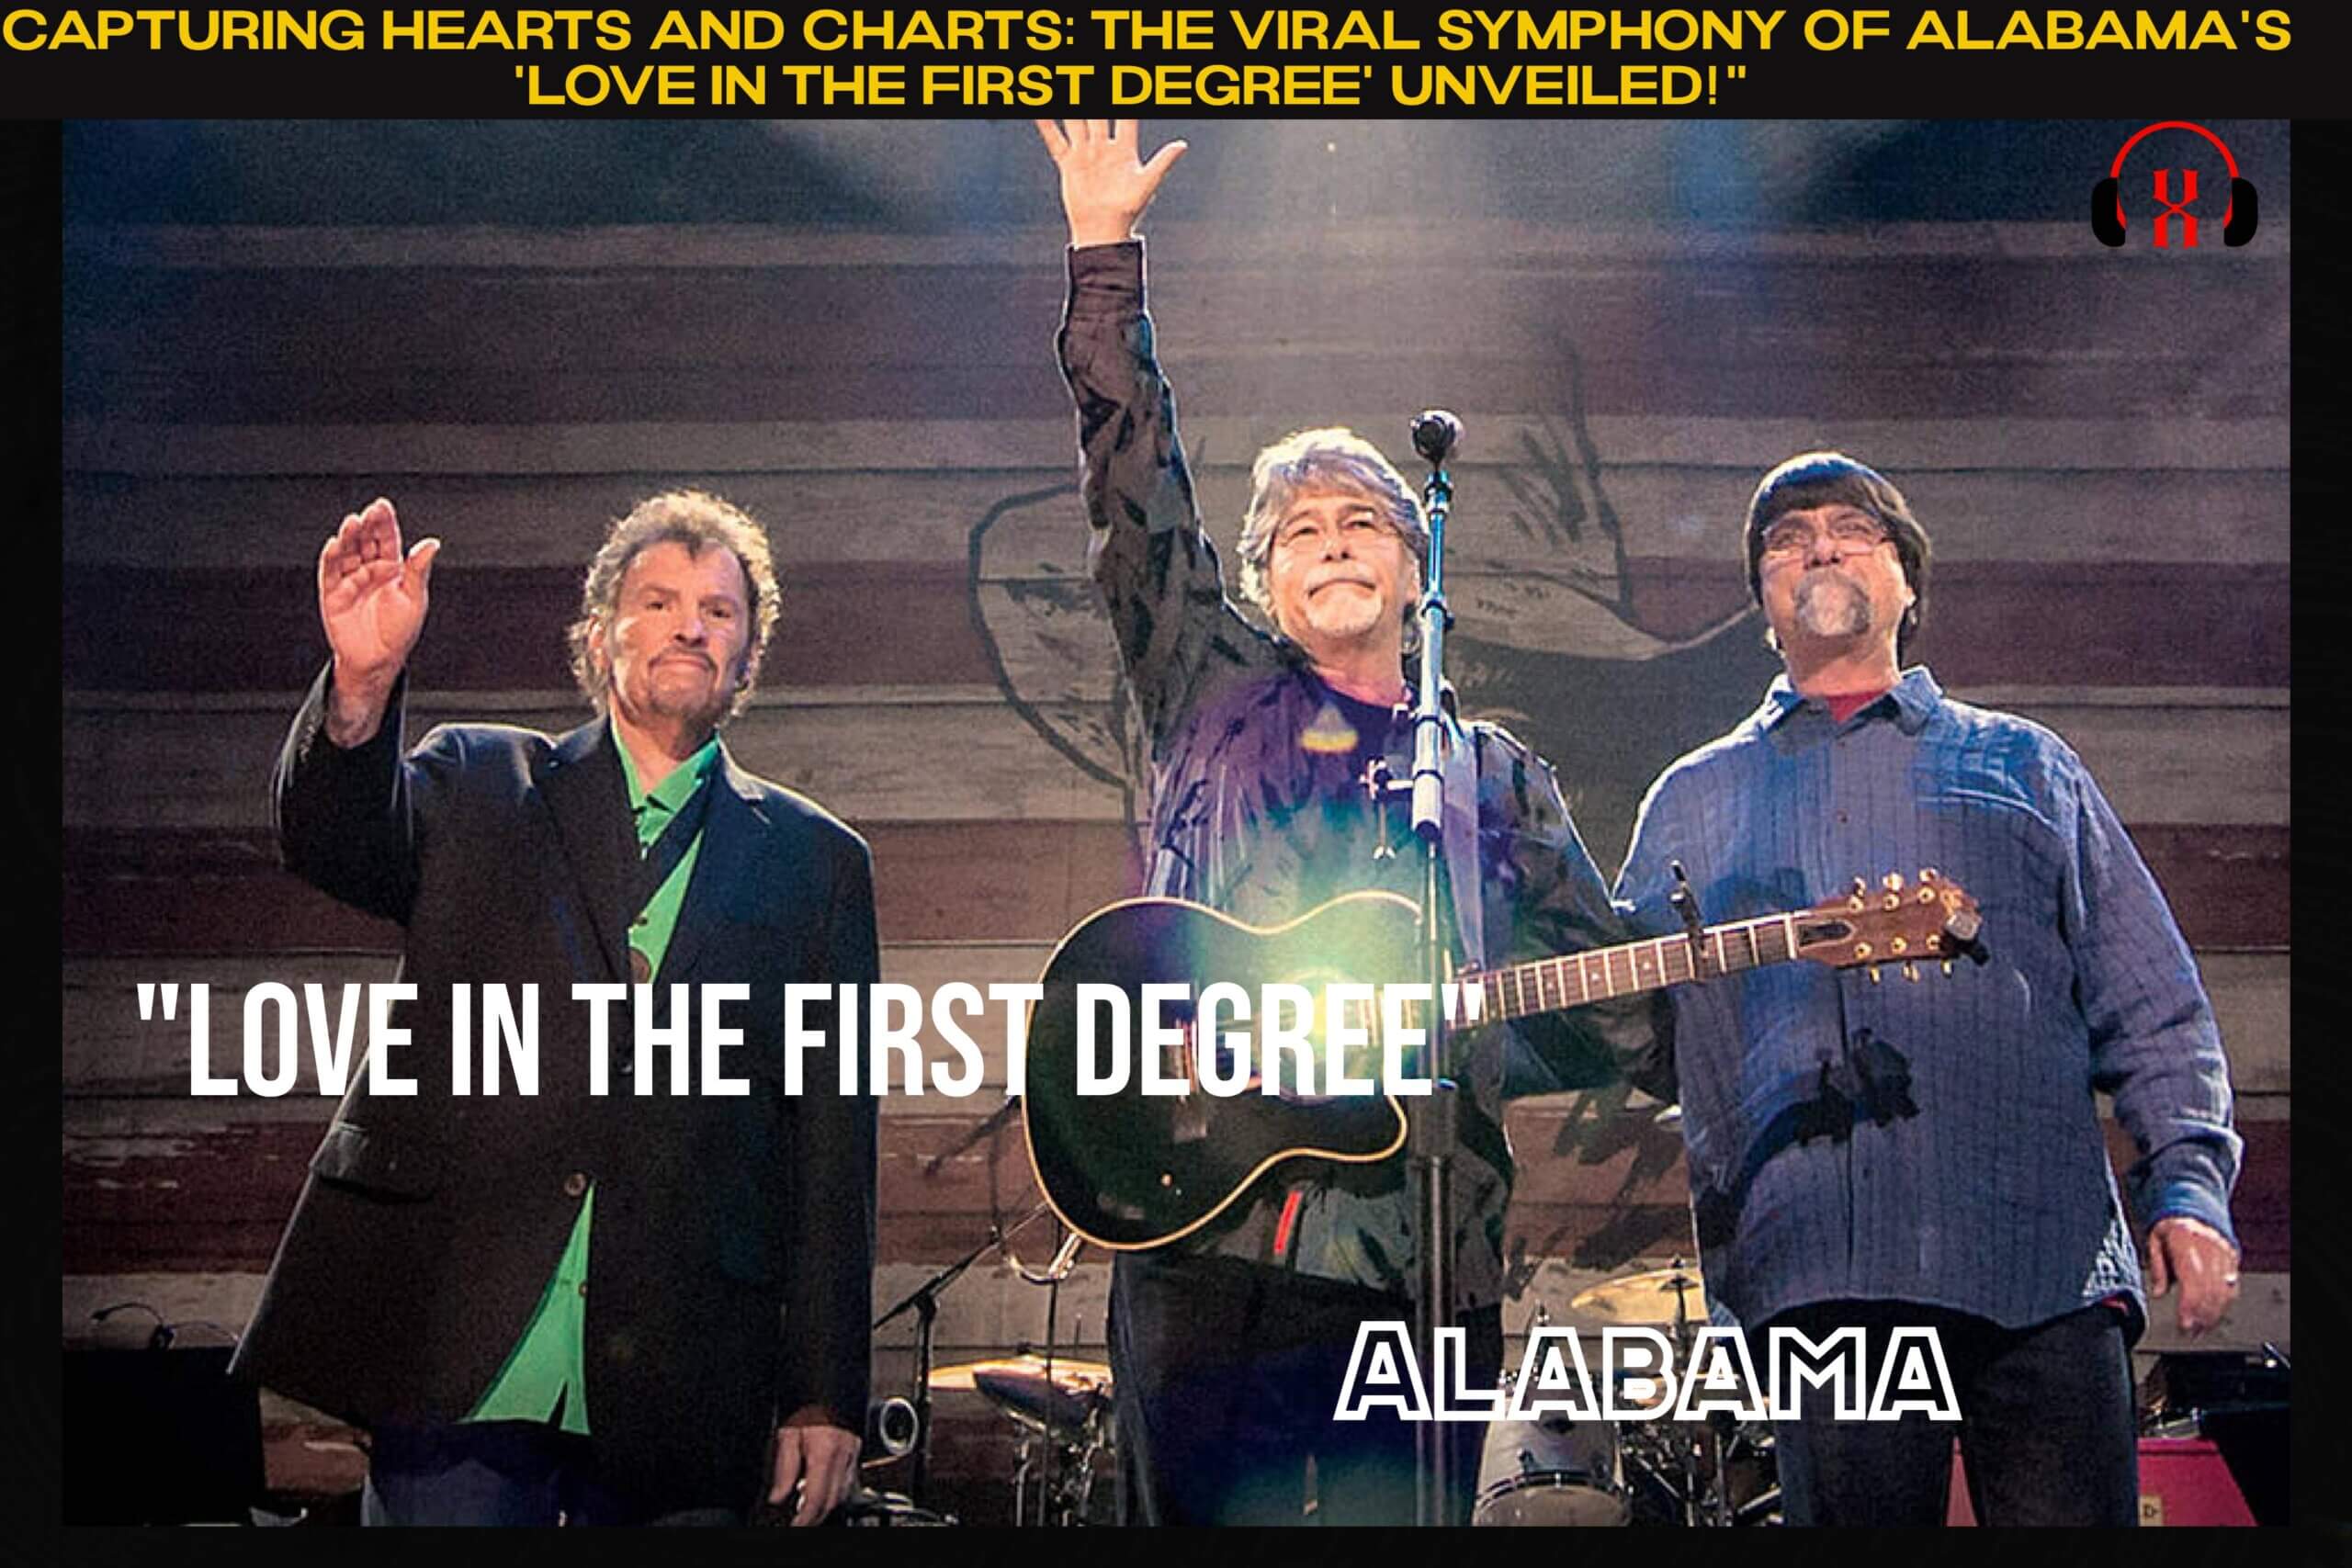 Capturing Hearts and Charts The Viral Symphony of Alabama's 'Love In the First Degree' Unveiled